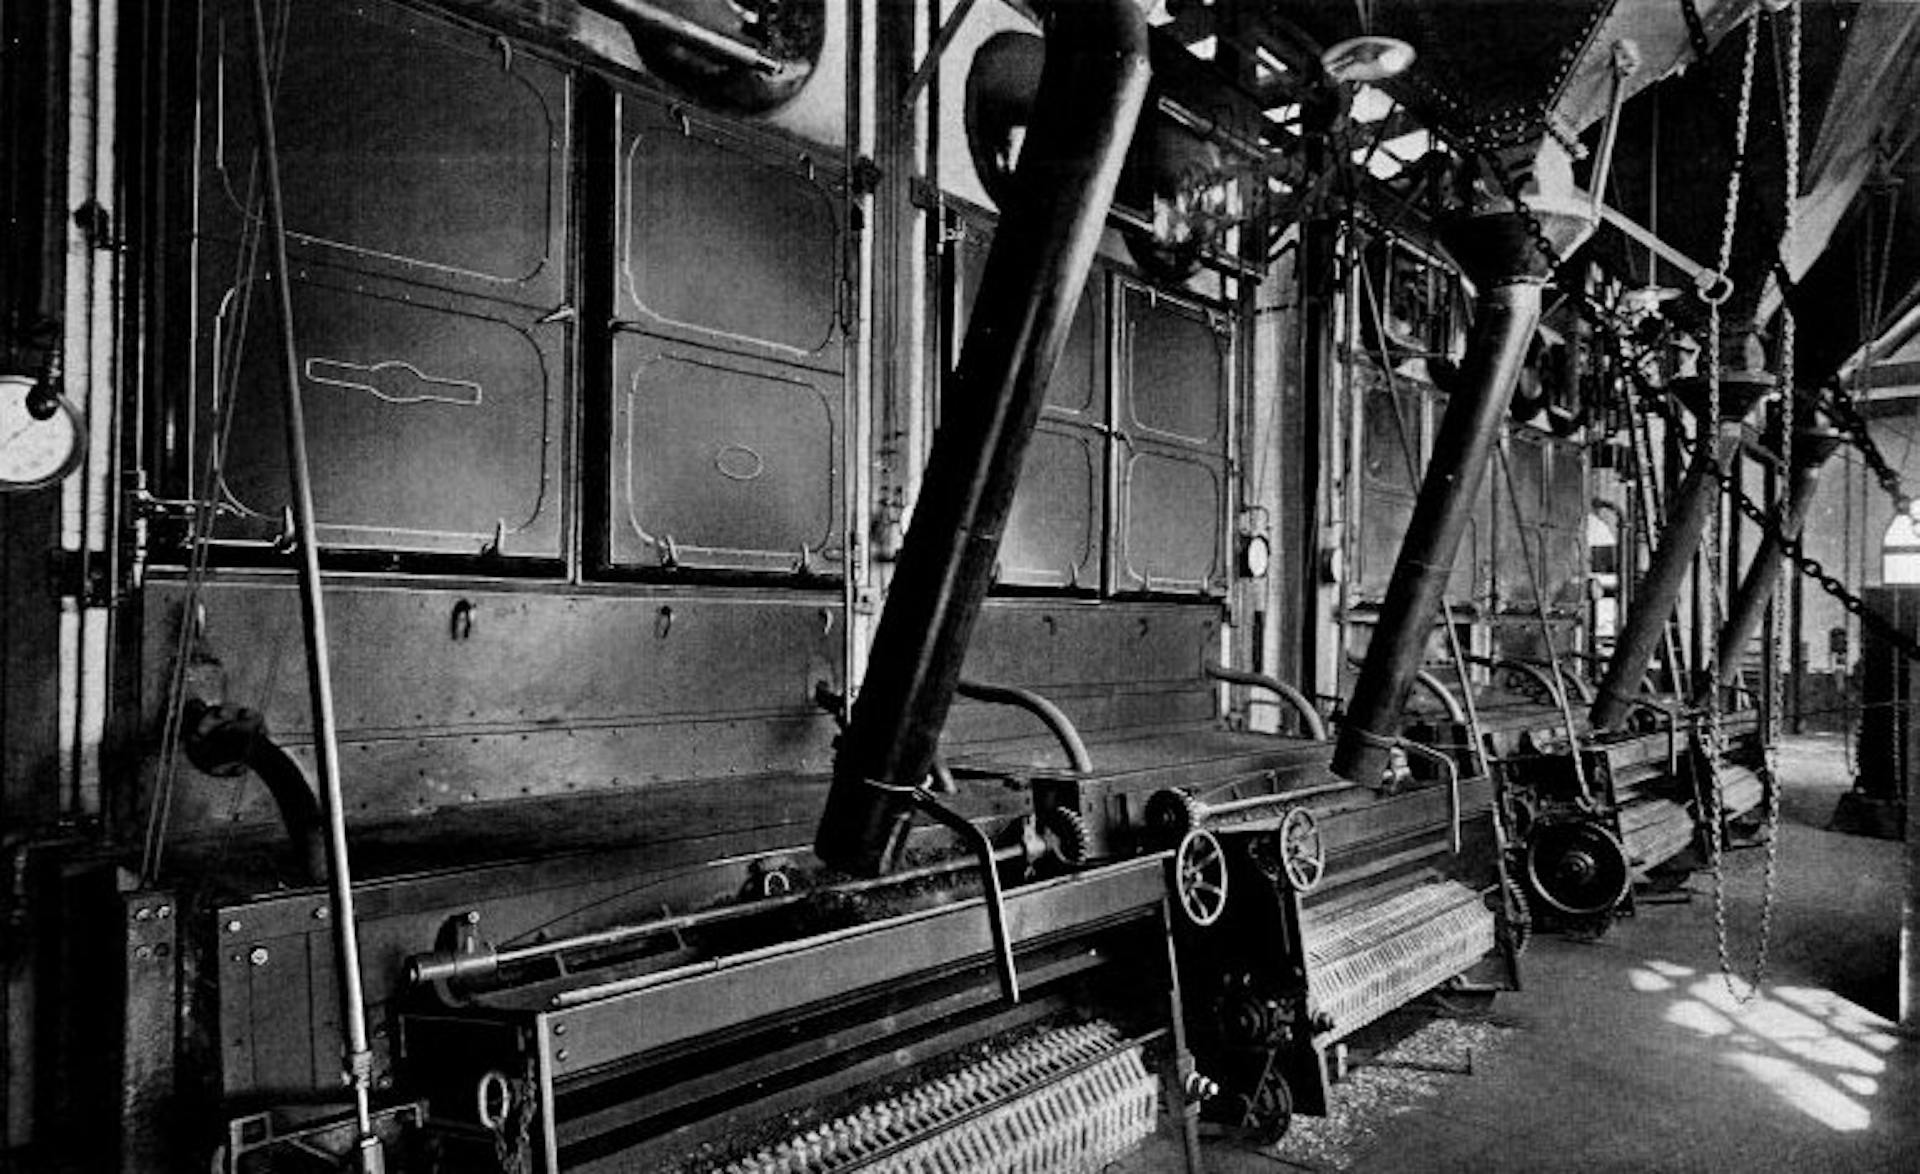 2000 Horse-power Installation of Babcock & Wilcox Boilers, Equipped with Babcock & Wilcox Chain Grate Stokers at the Sunnyside Plant of the Pennsylvania Tunnel and Terminal Railroad Co., Long Island City, N. Y.